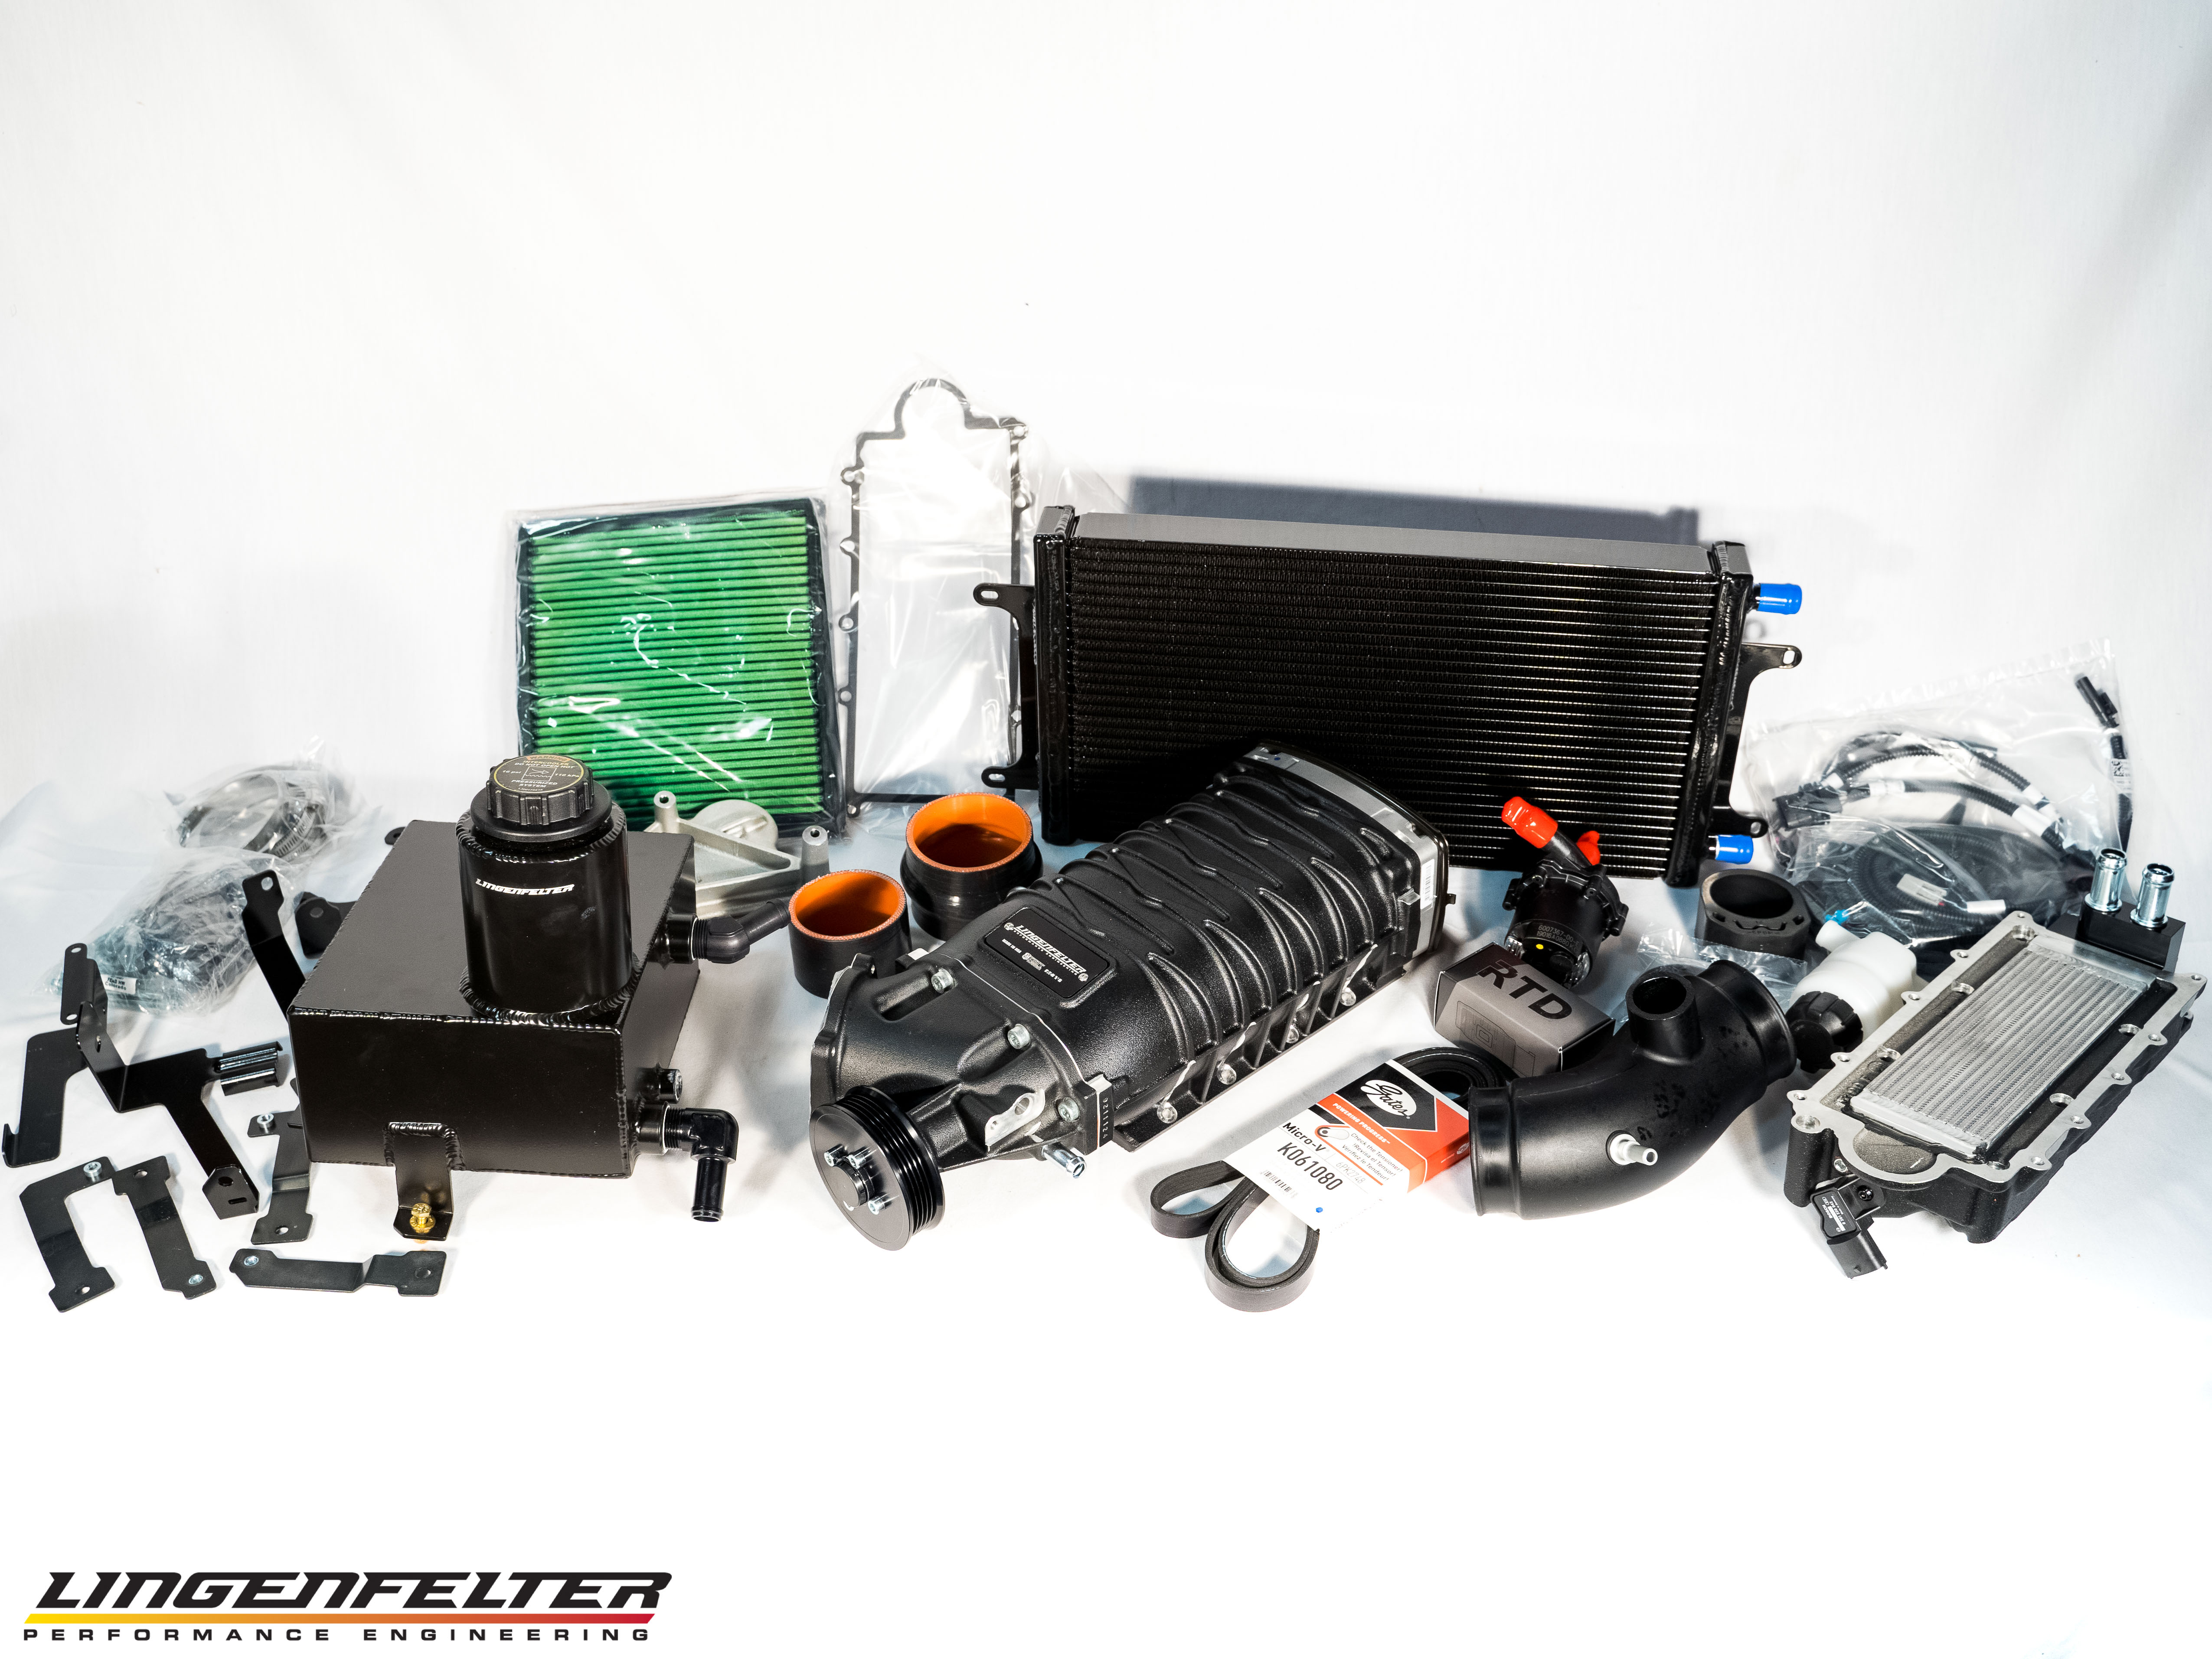 Lingenfelter Performance Engineering DIY Package For Chevy Colorado